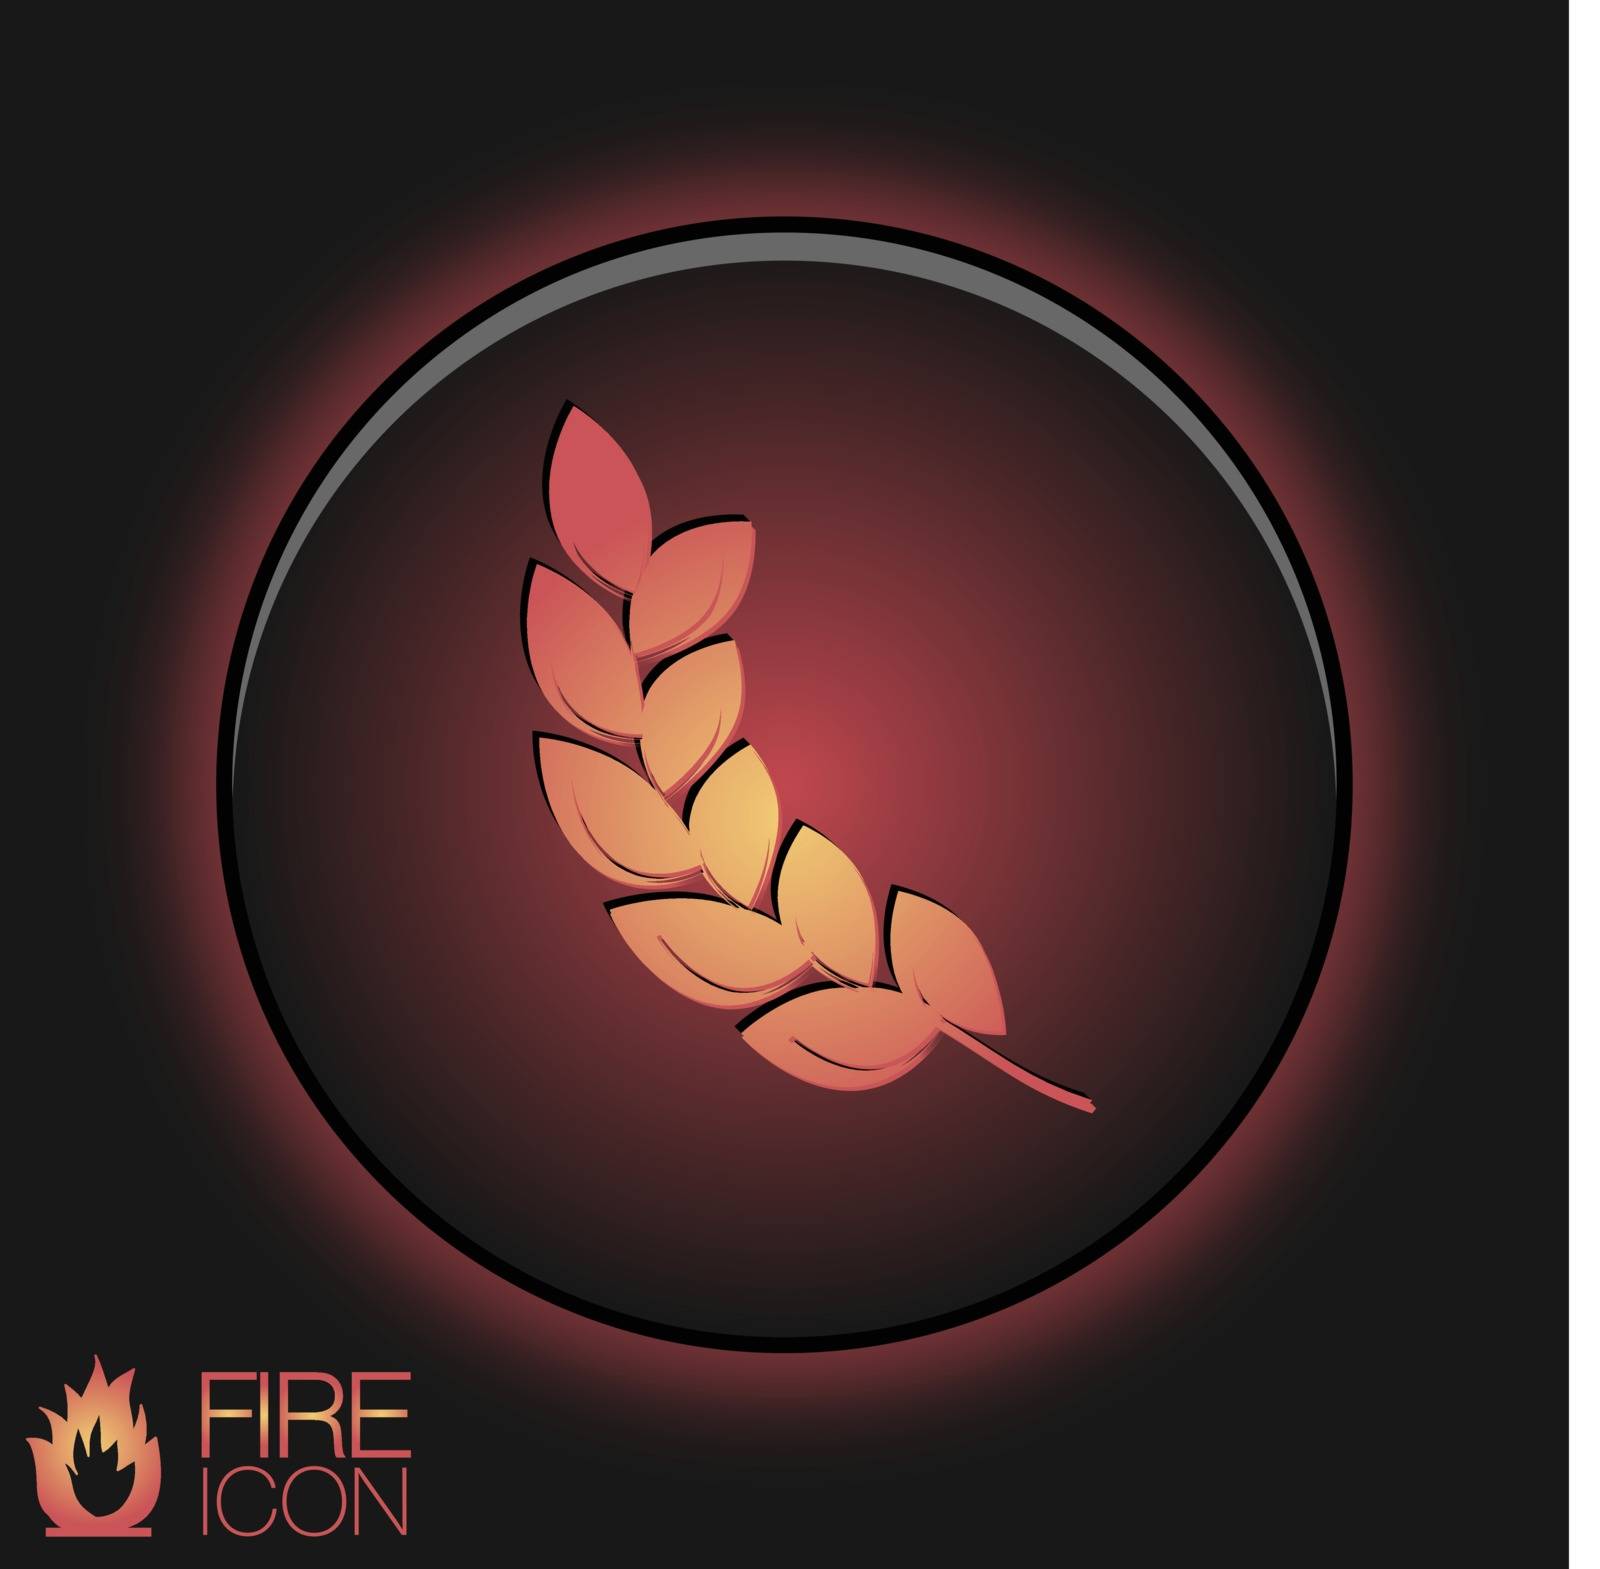 abstract wheat spike ears icon by LittleCuckoo